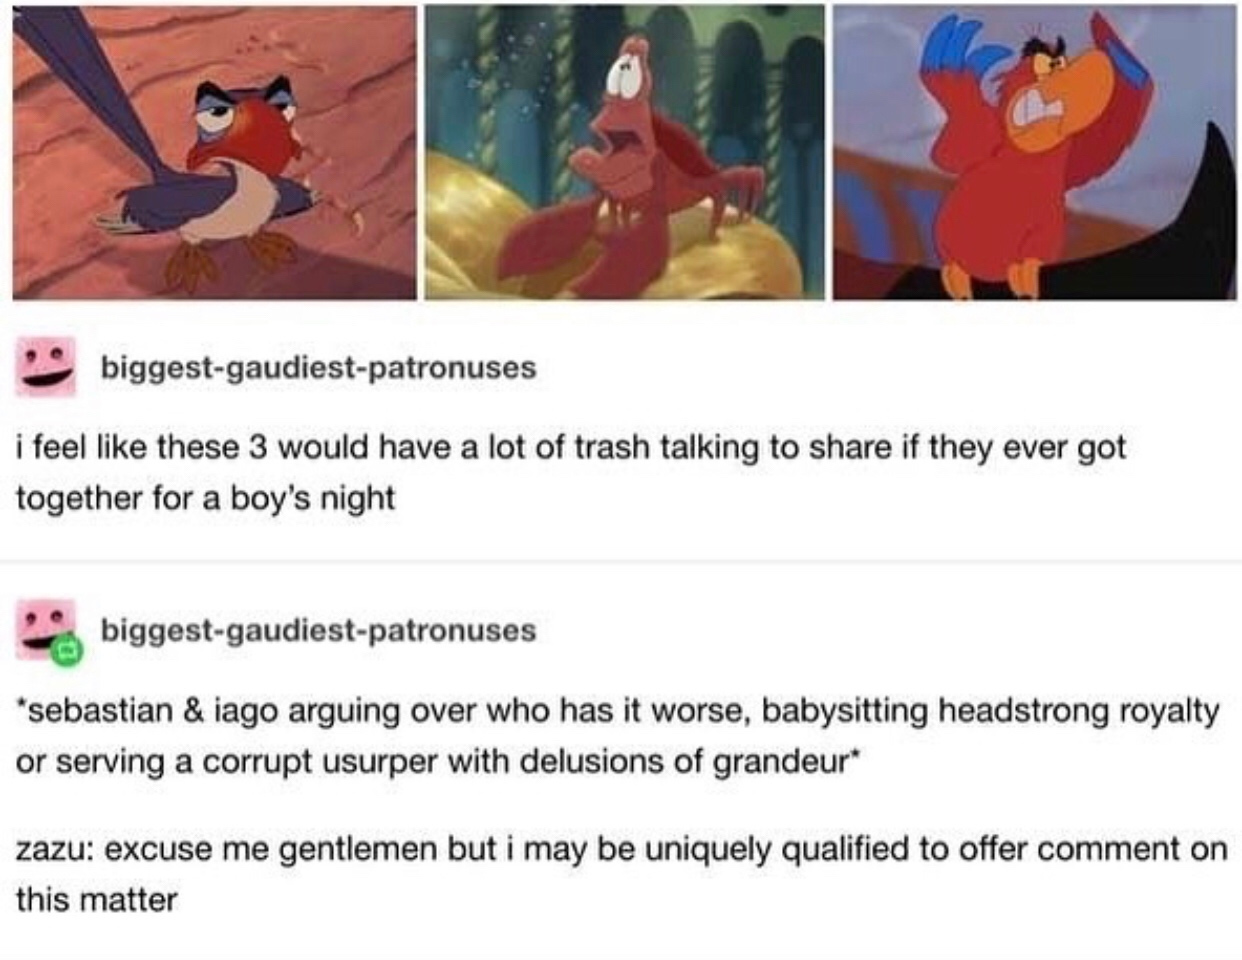 biggest gaudiest patronuses tumblr funny - biggest gaudiestpatronuses i feel these 3 would have a lot of trash talking to if they ever got together for a boy's night biggestgaudiestpatronuses sebastian & iago arguing over who has it worse, babysitting hea